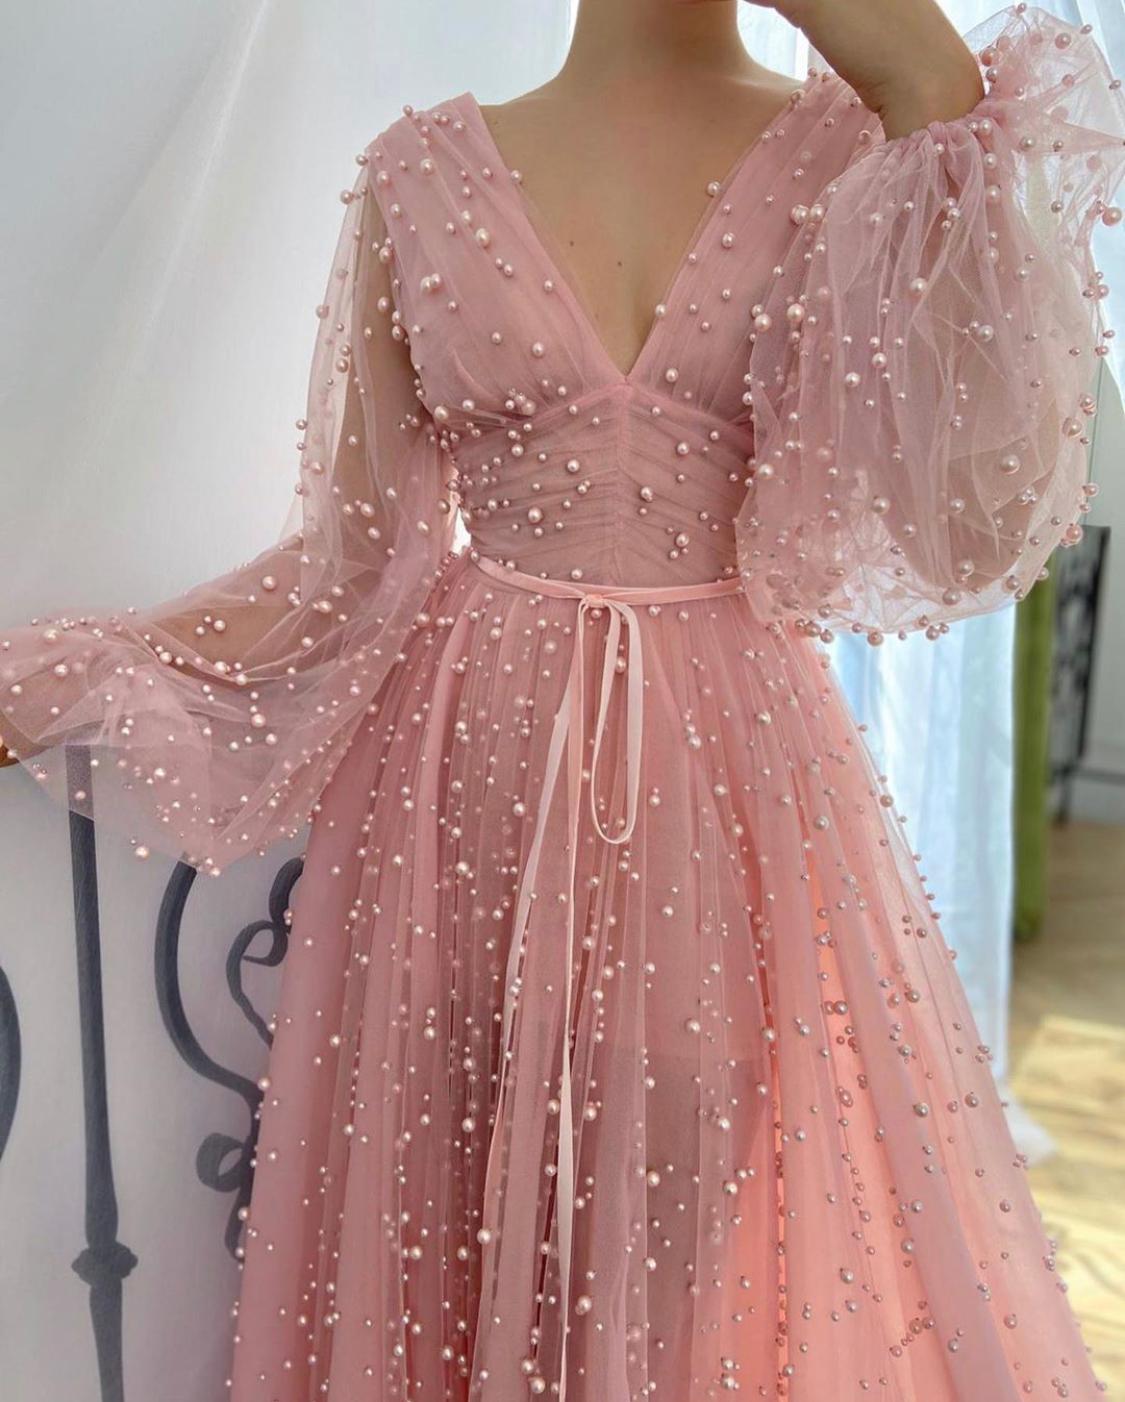 Pink A-Line dress with long sleeves, v-neck and beading